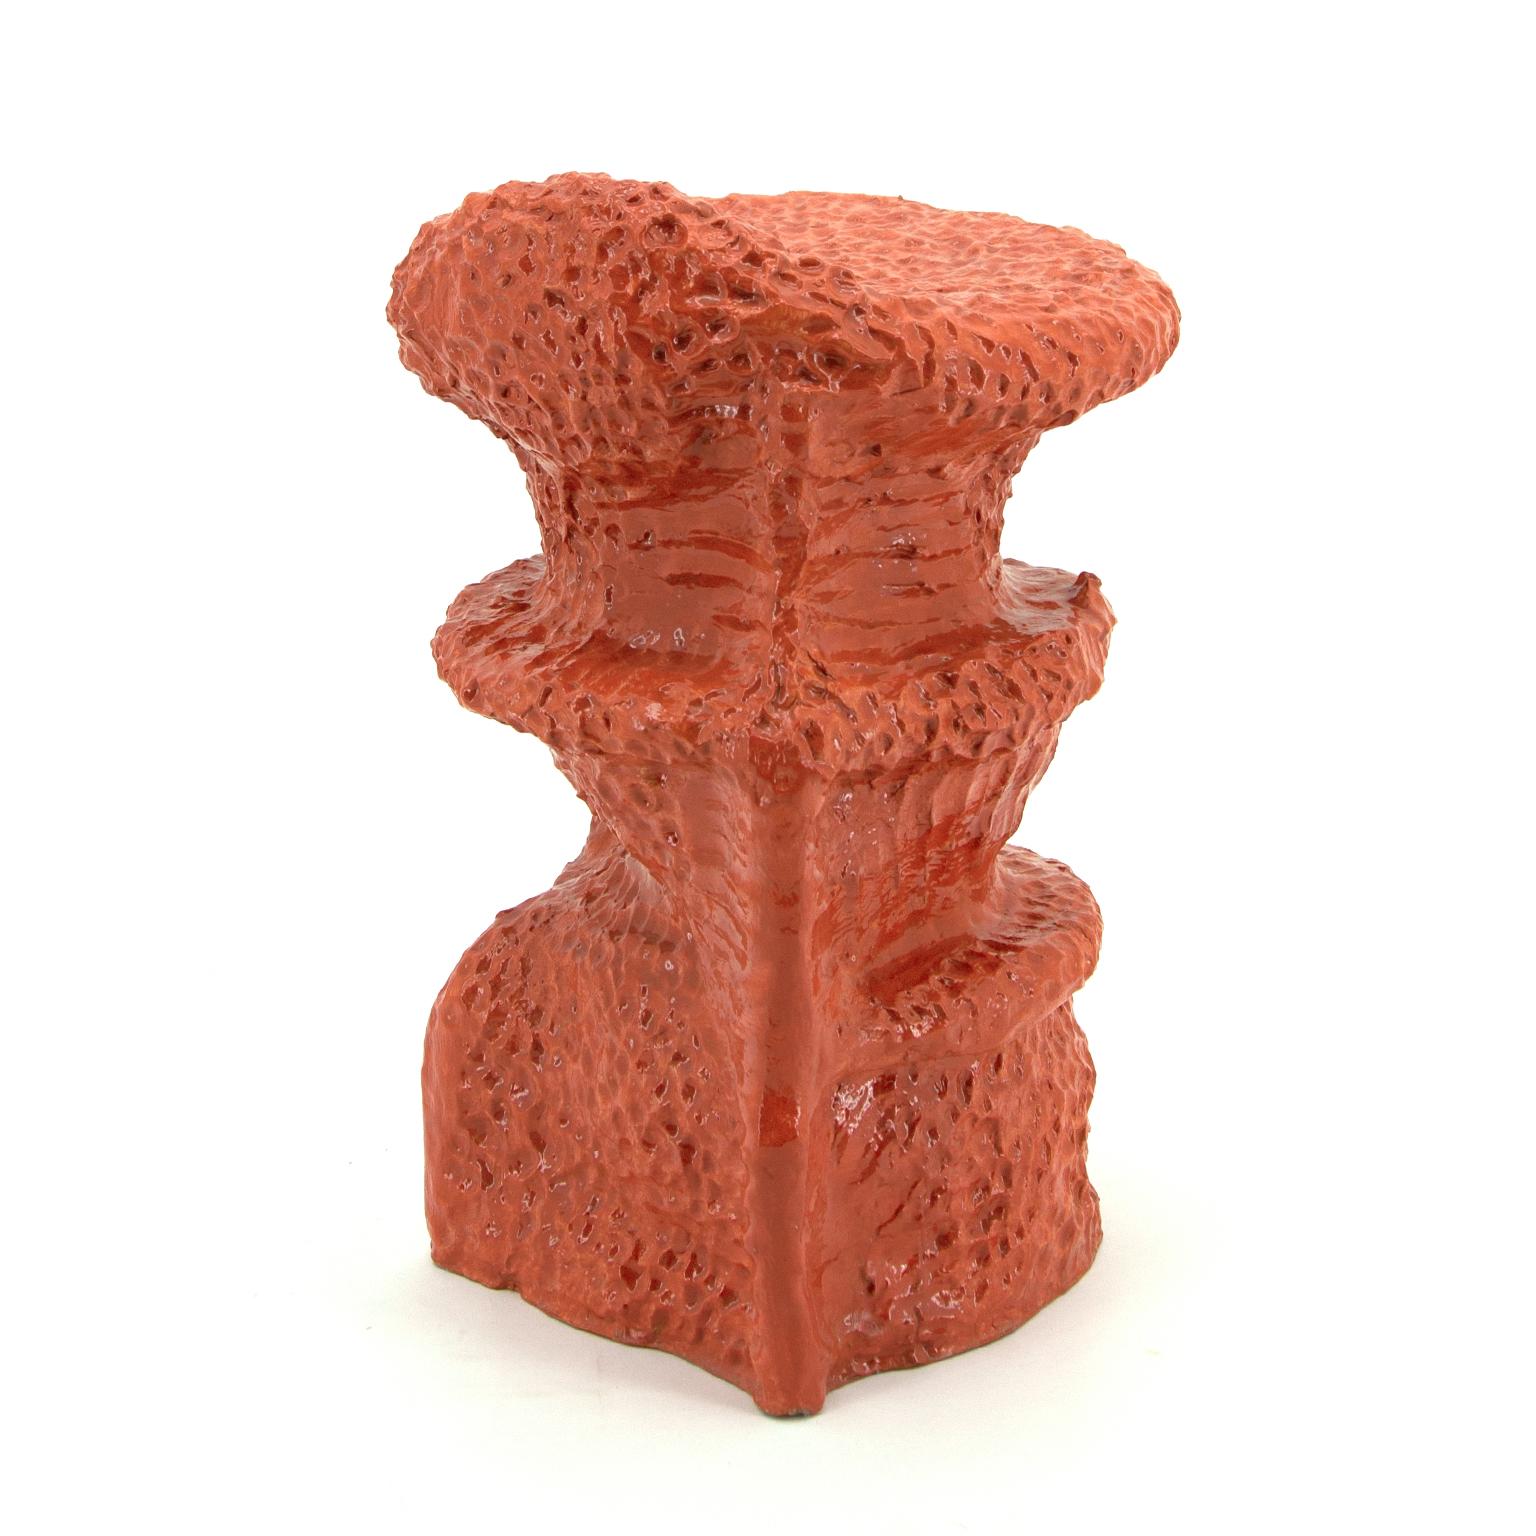 Unique stool, hand build by the artist in 2020. The unique technique Rutger de Regt has developed, enabled the unique imagery of the series. This contemporary ceramic stool, orange high gloss finish is part of the first series.

Measures: Orange